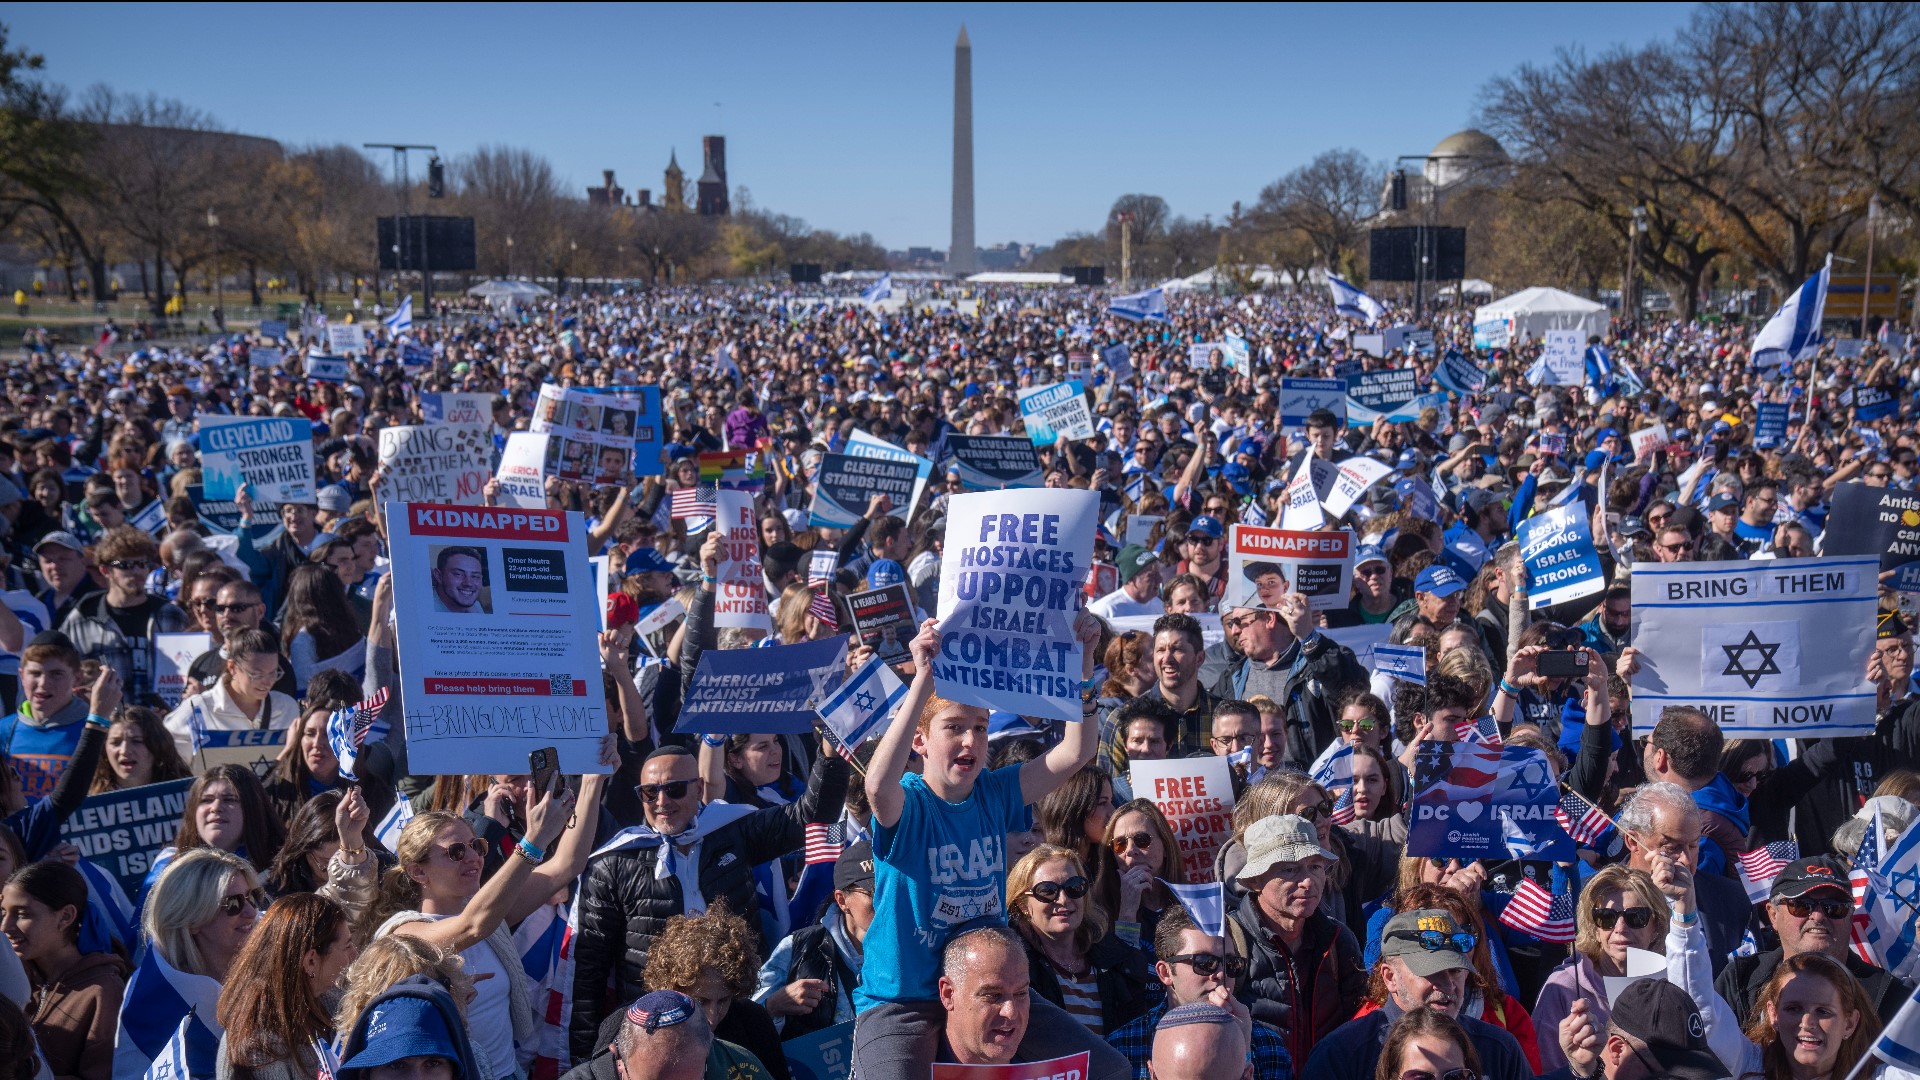 Thousands are expected to gather this afternoon on the National Mall for a pro-Israel rally.